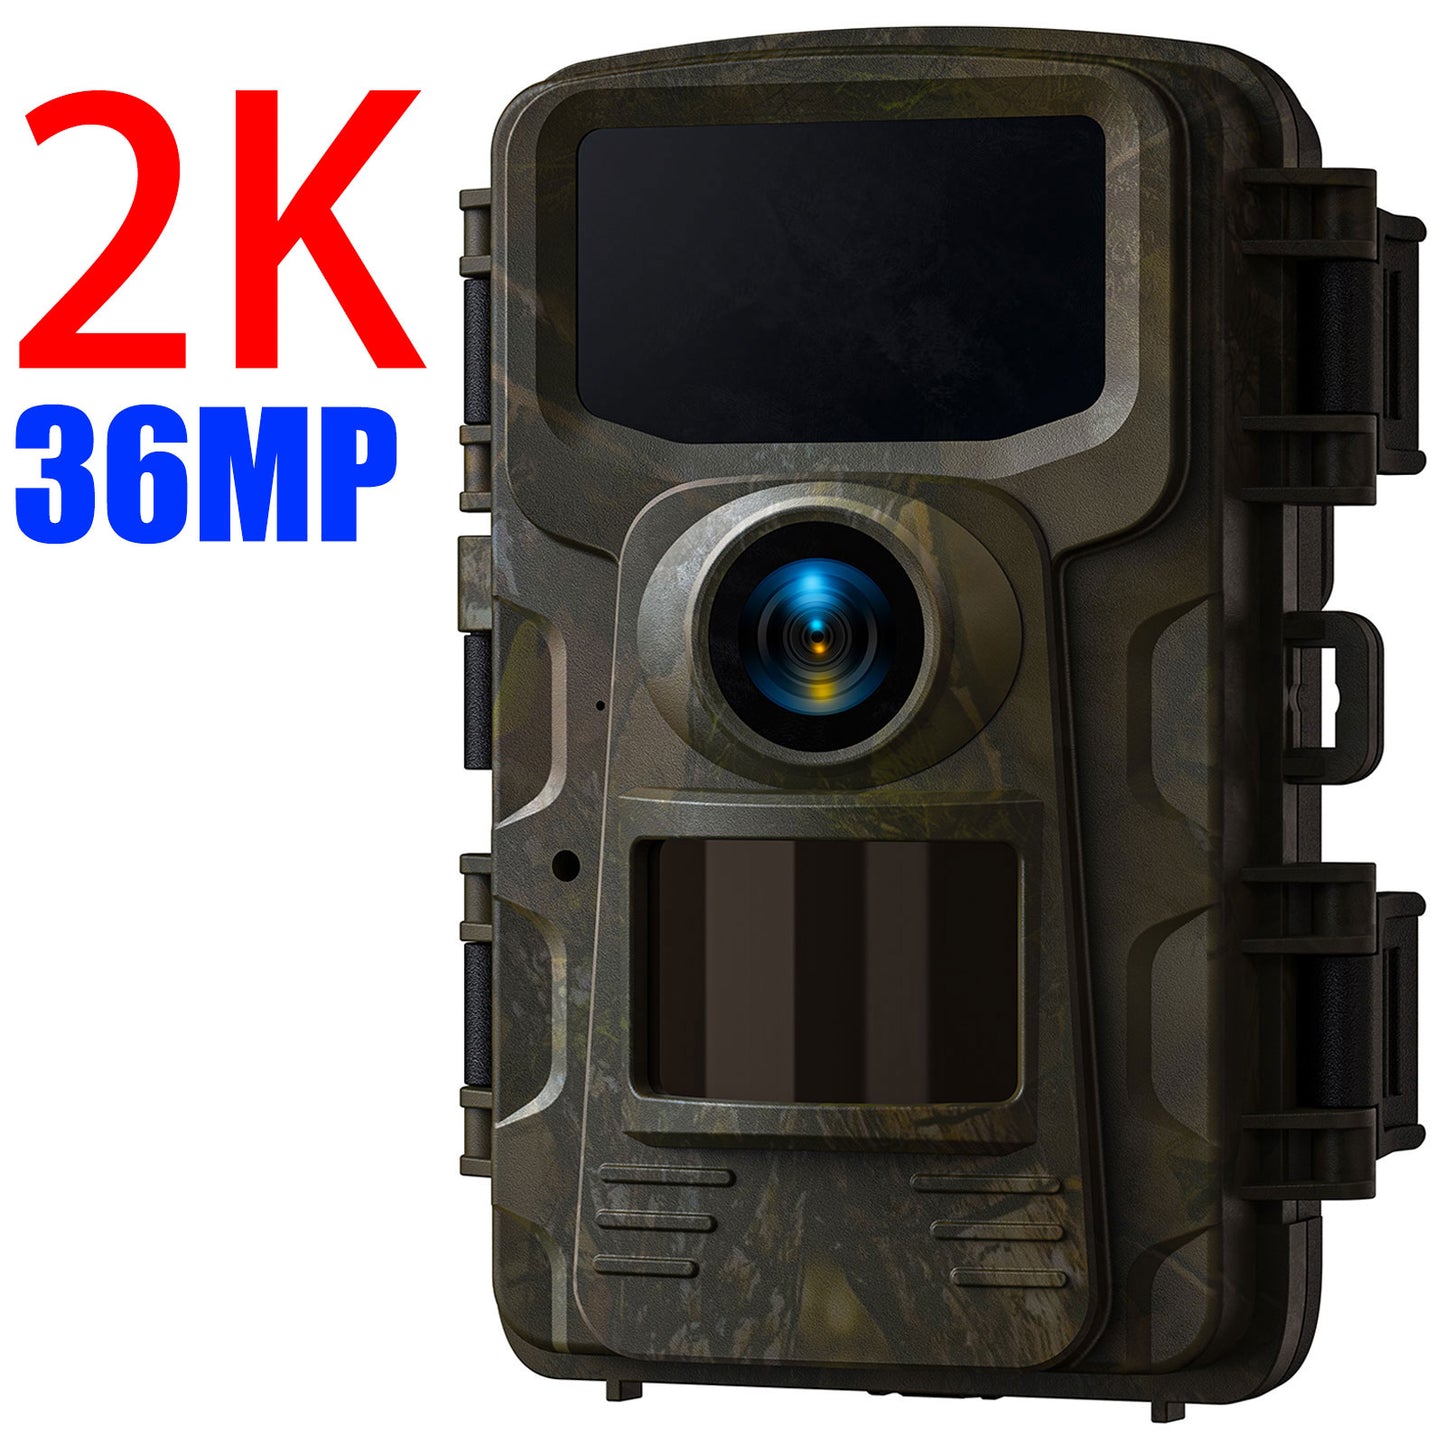 CAMPARK Infrared Trail Camera 32MP 2K Game Camera with Night Vision Waterproof 65FT Wildlife Scouting Hunting Trail Cam with 120° Wide Angle Lens 2.0" LCD